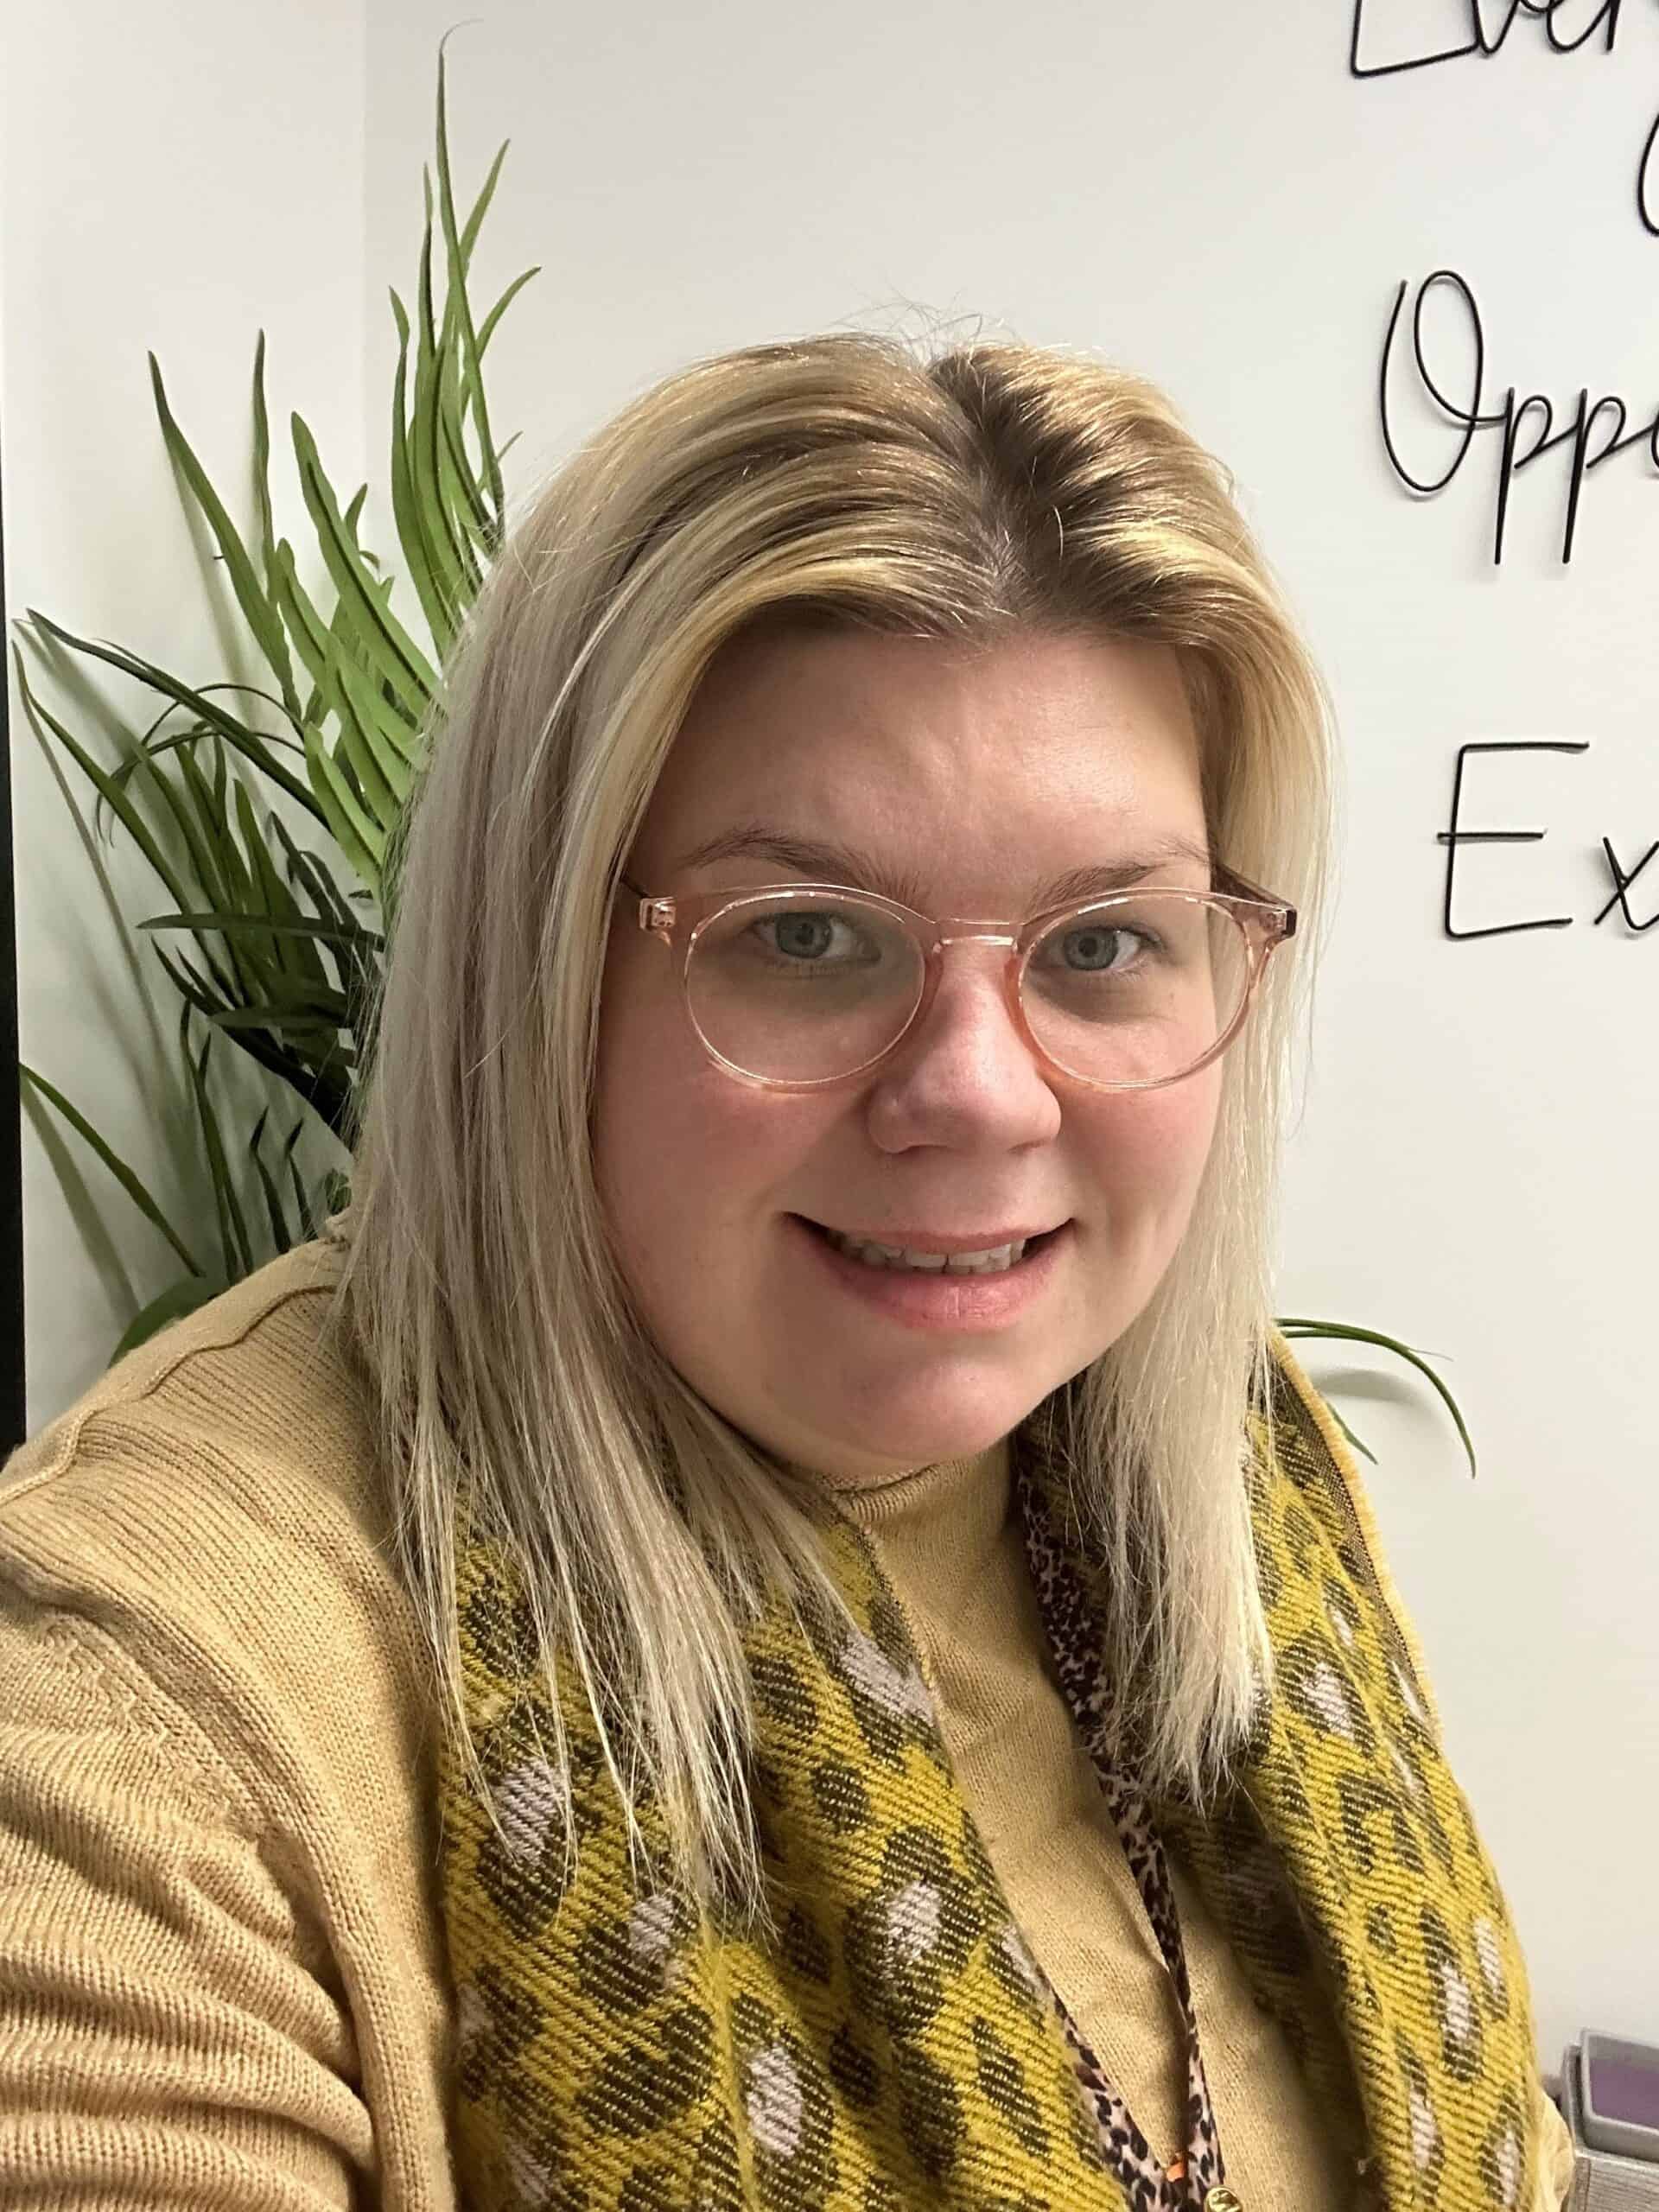 Headshot of olivia Echoes Childcare manager, wearing a yellow top and scarf